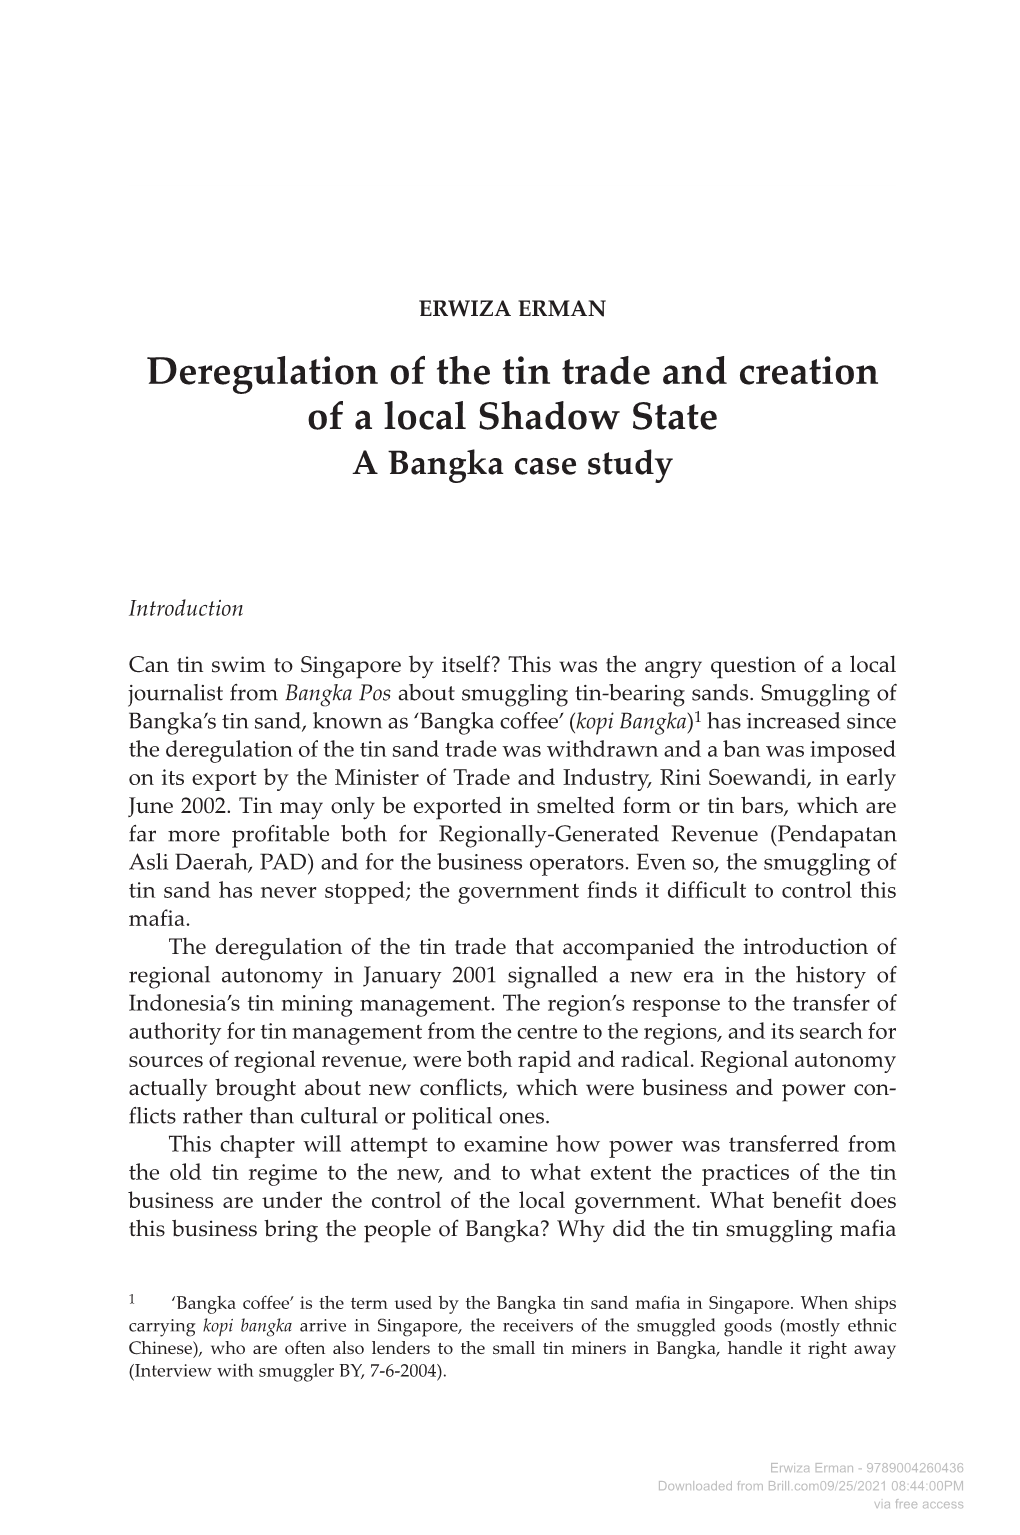 Deregulation of the Tin Trade and Creation of a Local Shadow State a Bangka Case Study